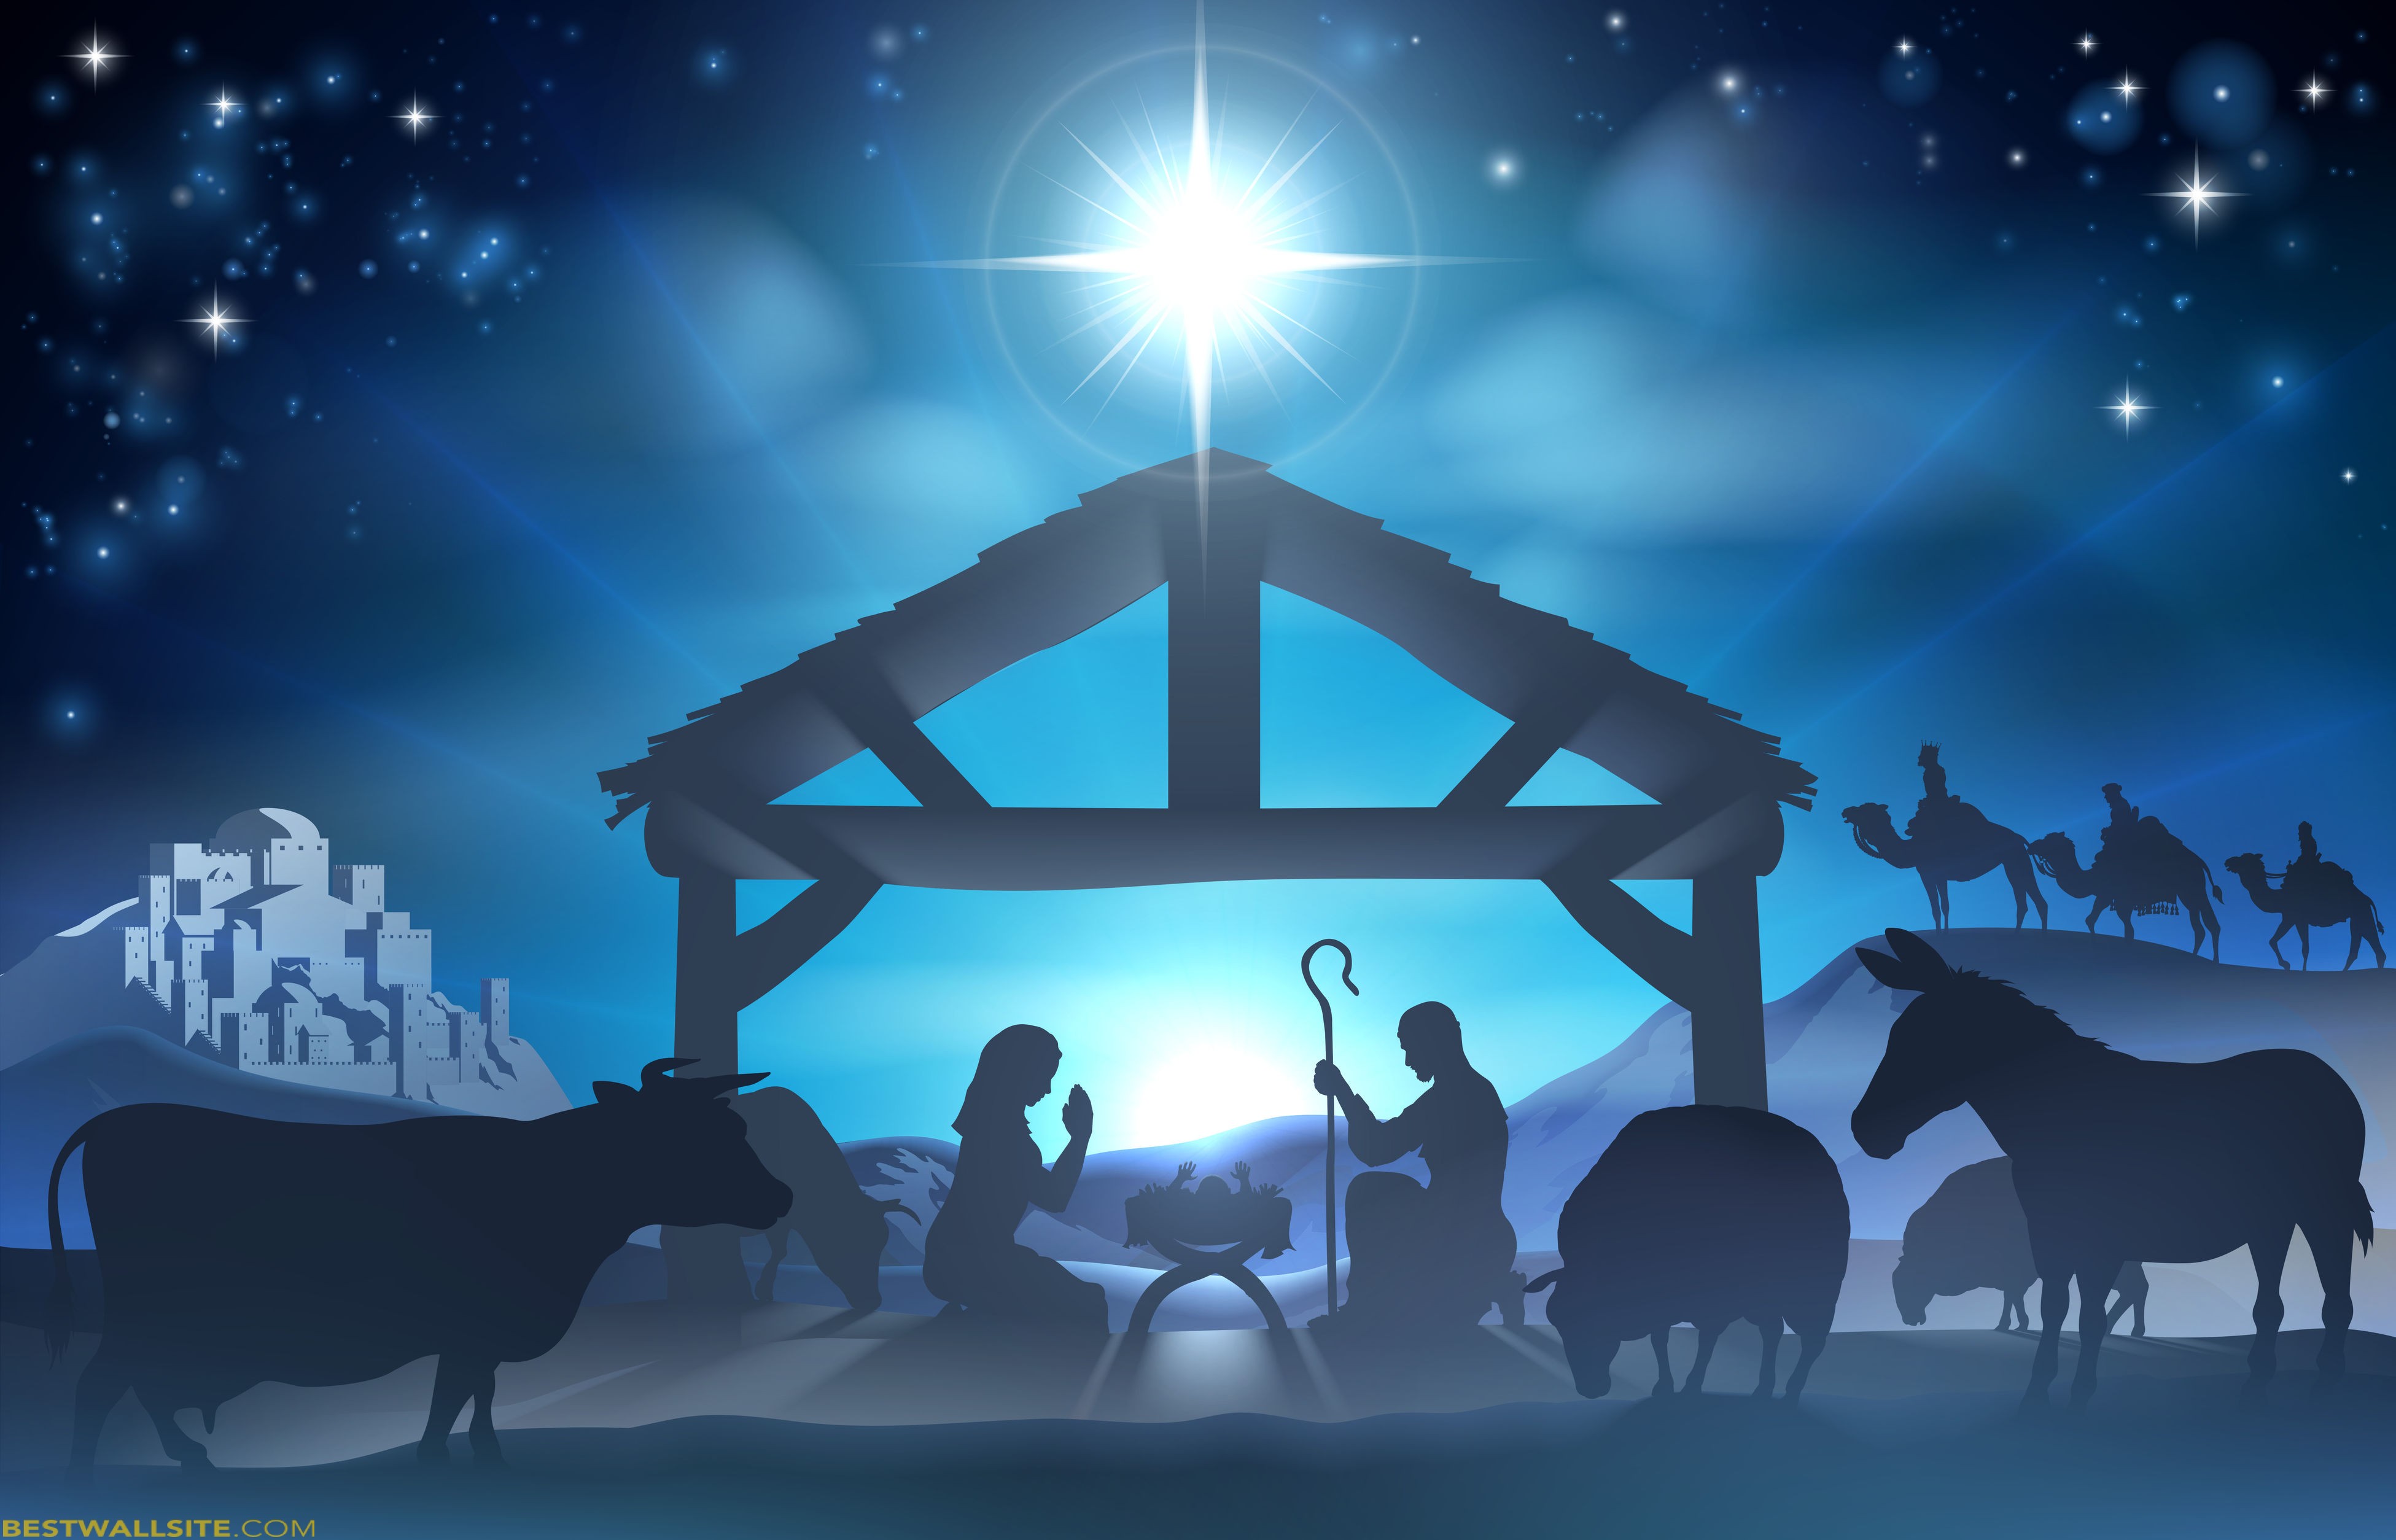 10 Nativity HD Wallpapers and Backgrounds